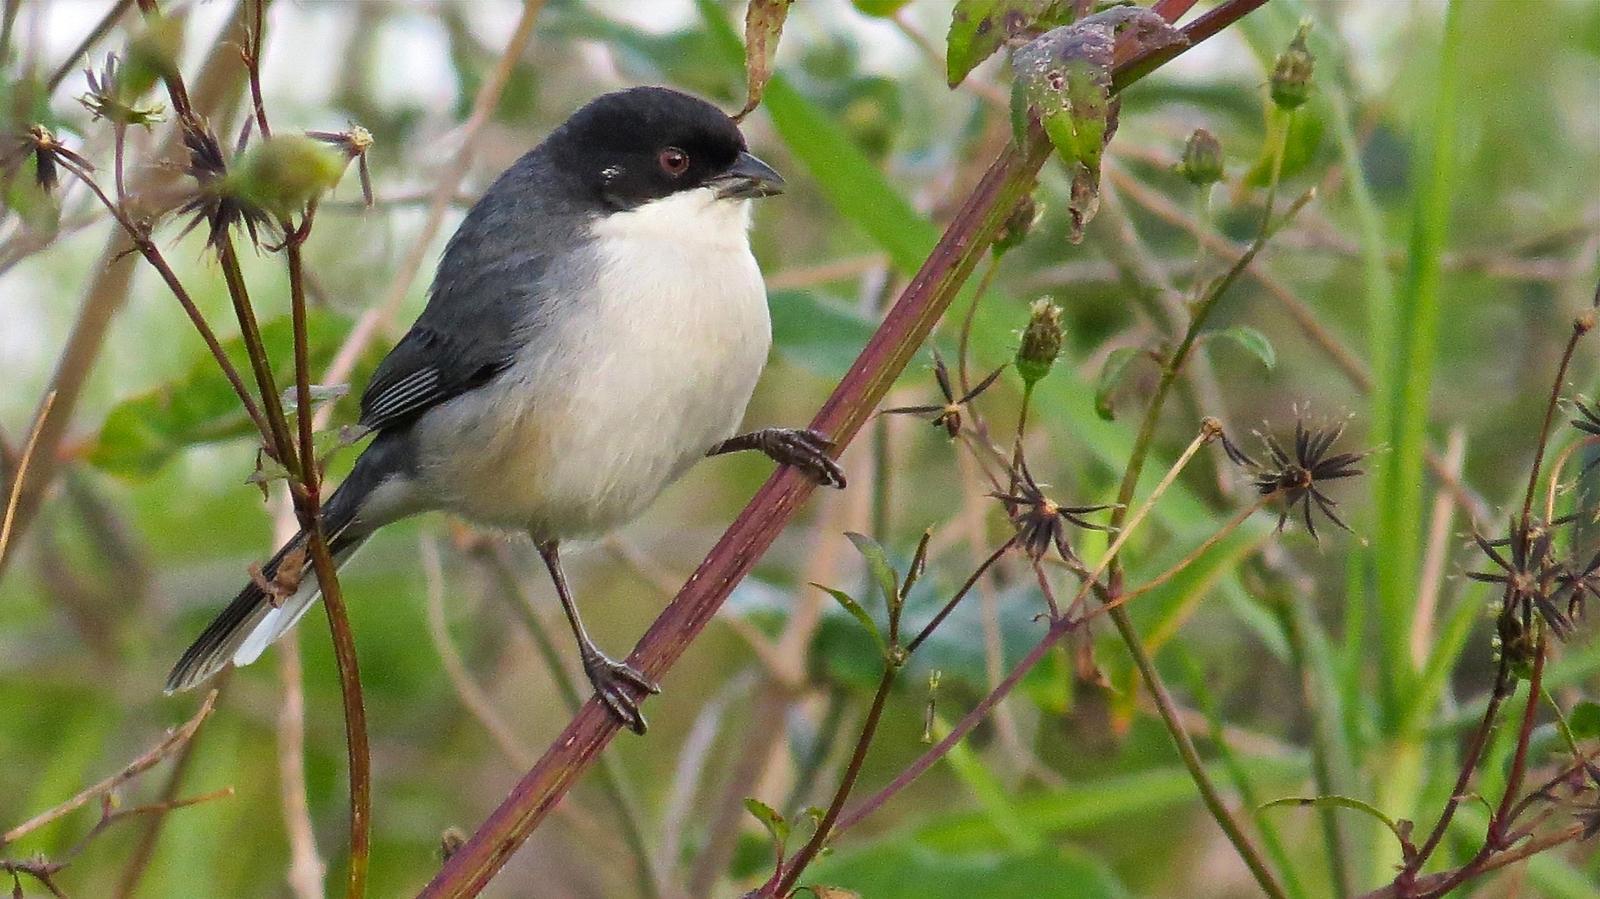 Black-capped Warbling-Finch Photo by Ken Pinnow